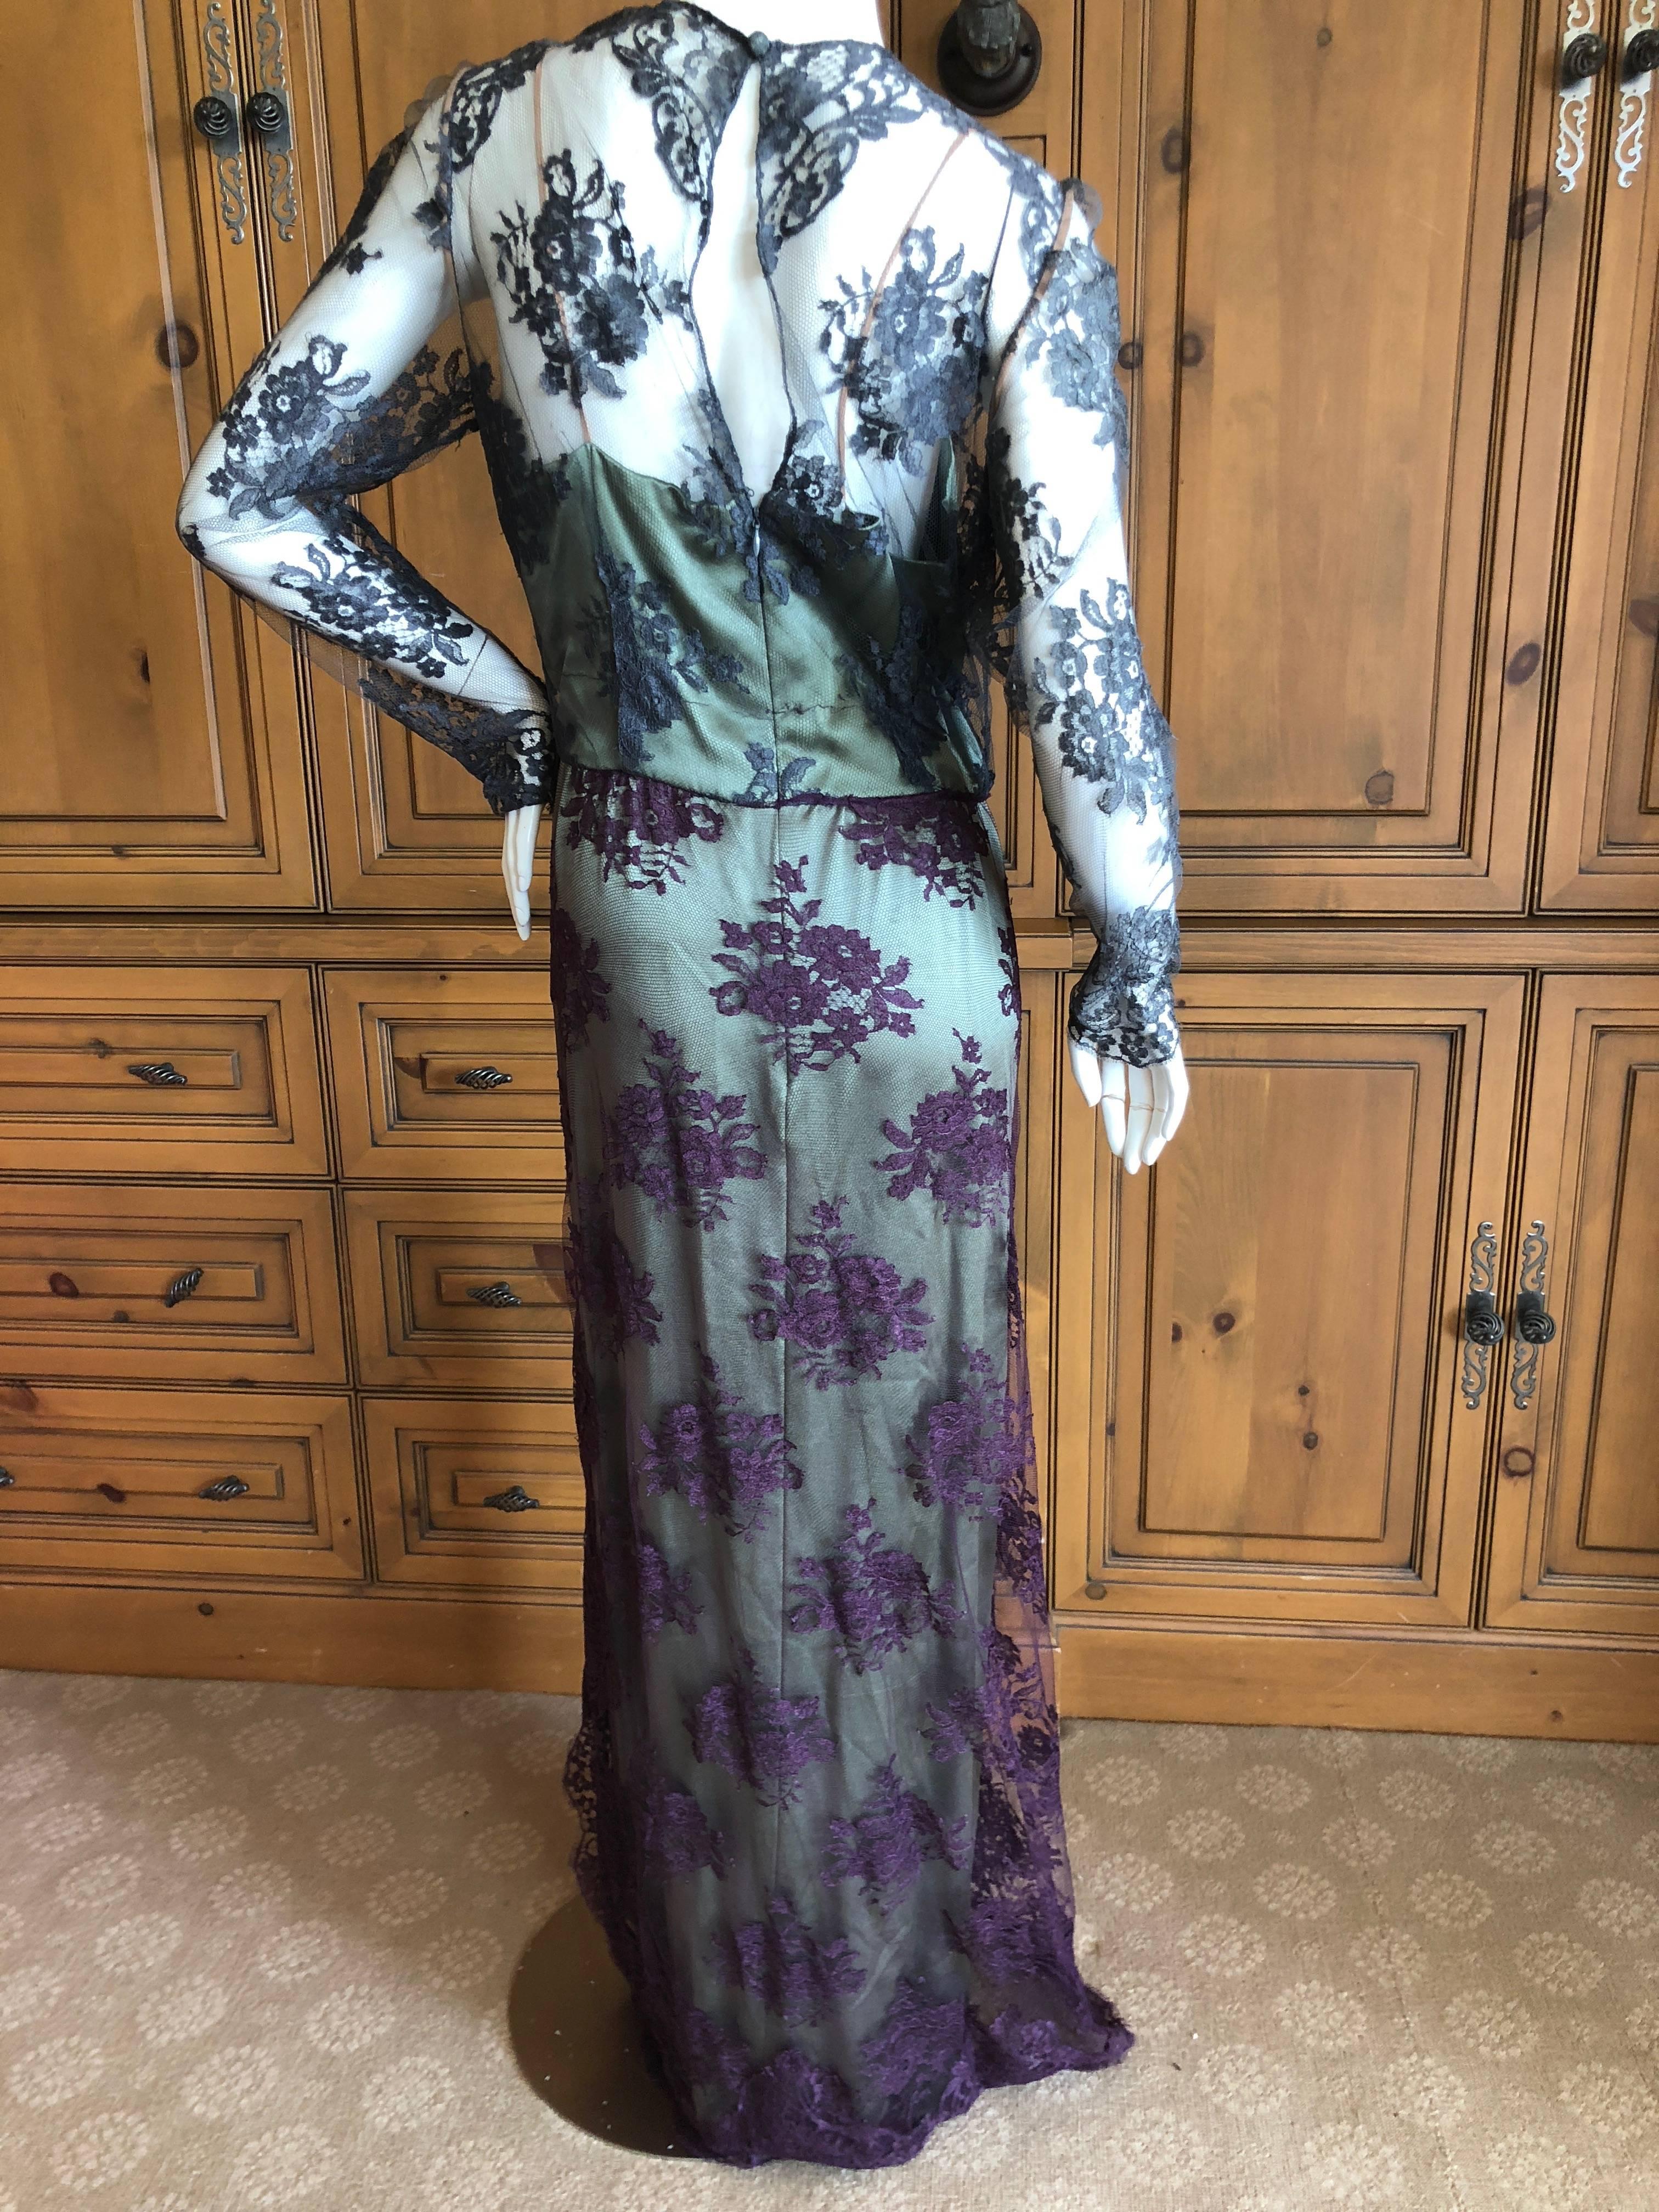 Bill Blass Vintage 1970's Silk Evening Dress with Lace Overlay Details For Sale 5